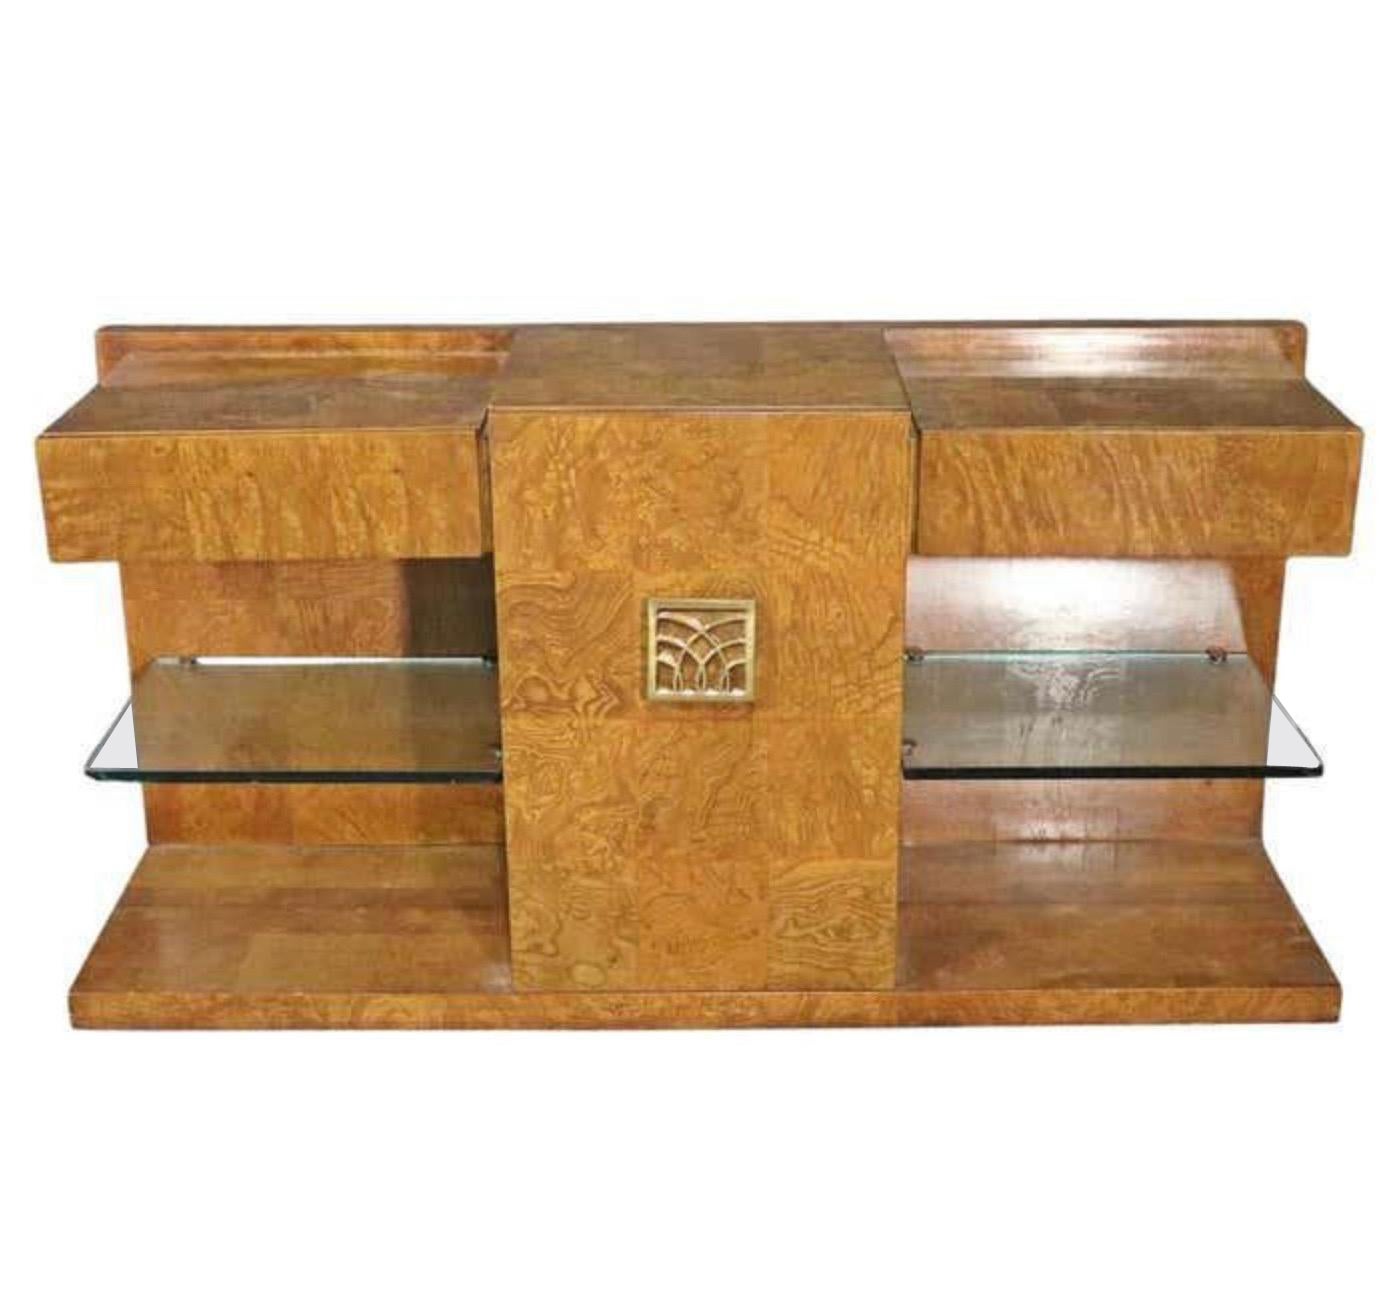 1970's Art Deco Burl Wood Floating Shelf Console by Jay Spectre for Century  For Sale